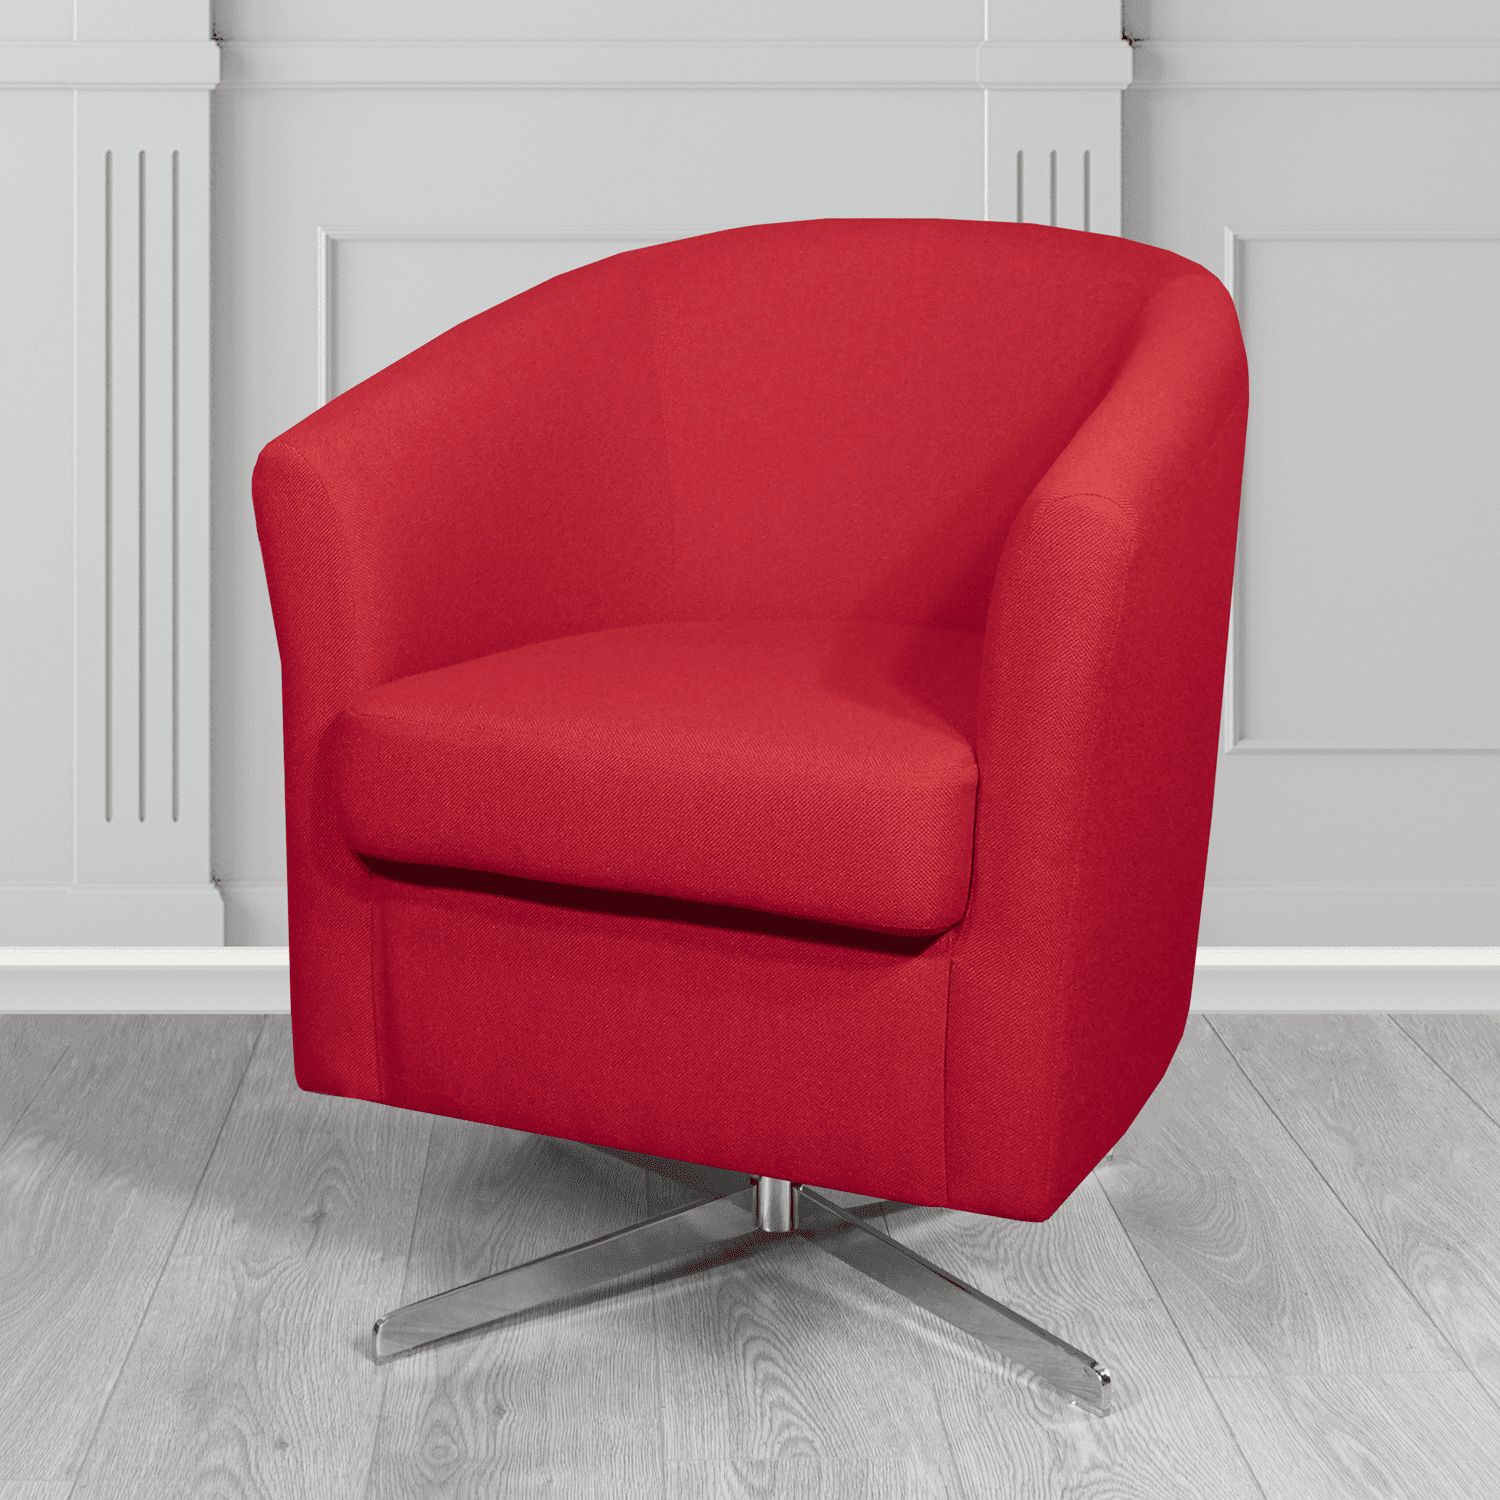 Cannes Swivel Tub Chair in Mainline Plus Red IF011 Crib 5 Fabric - The Tub Chair Shop